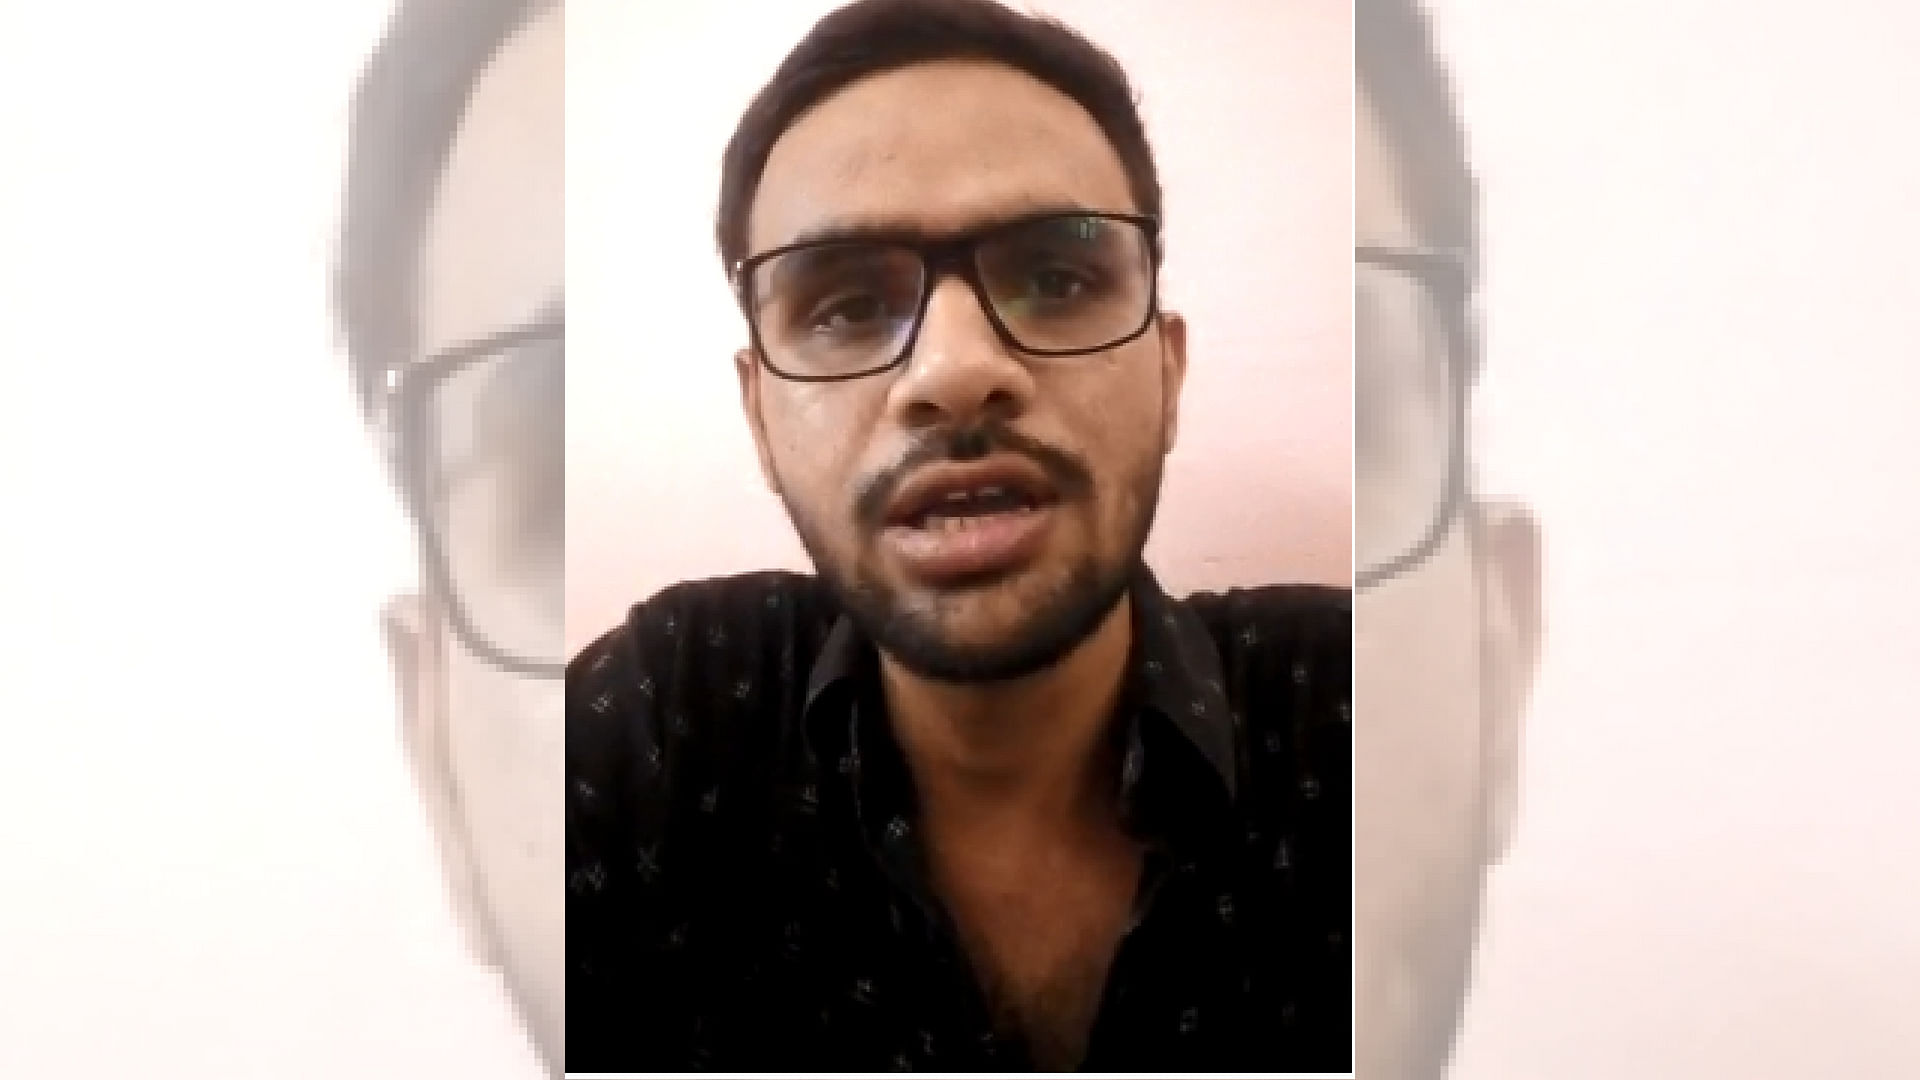 Journalist writer Nikhila Henry wrote about Umar Khalid’s exclusion from the upcoming fest for a session that she and musician Sumeet Samos were supposed to attend.